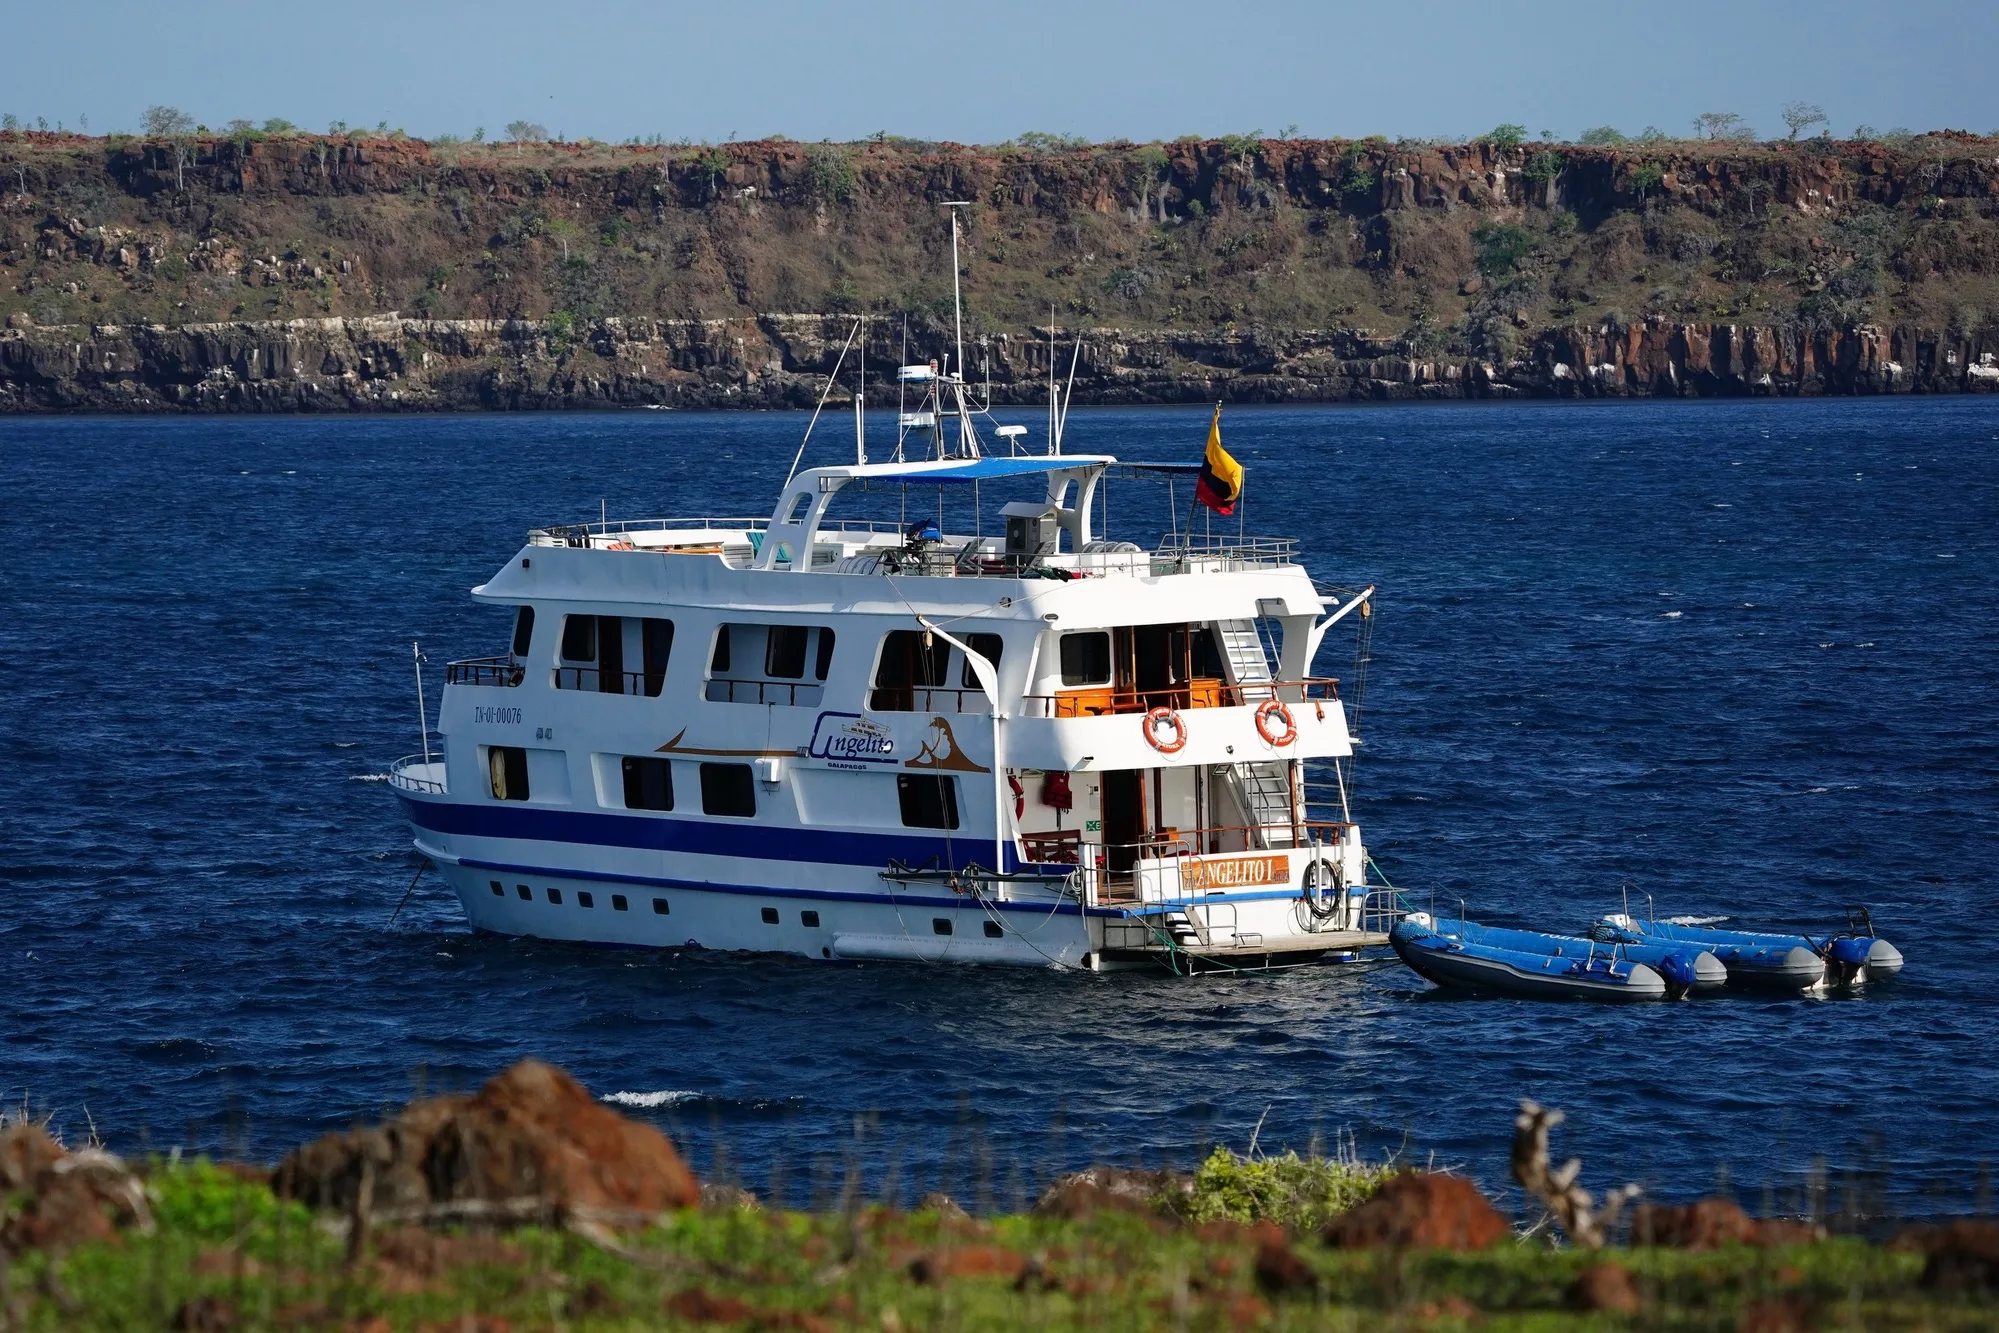 Galapagos Islands Yacht-Based Tour & Guided Photography Experience - Yacht on water